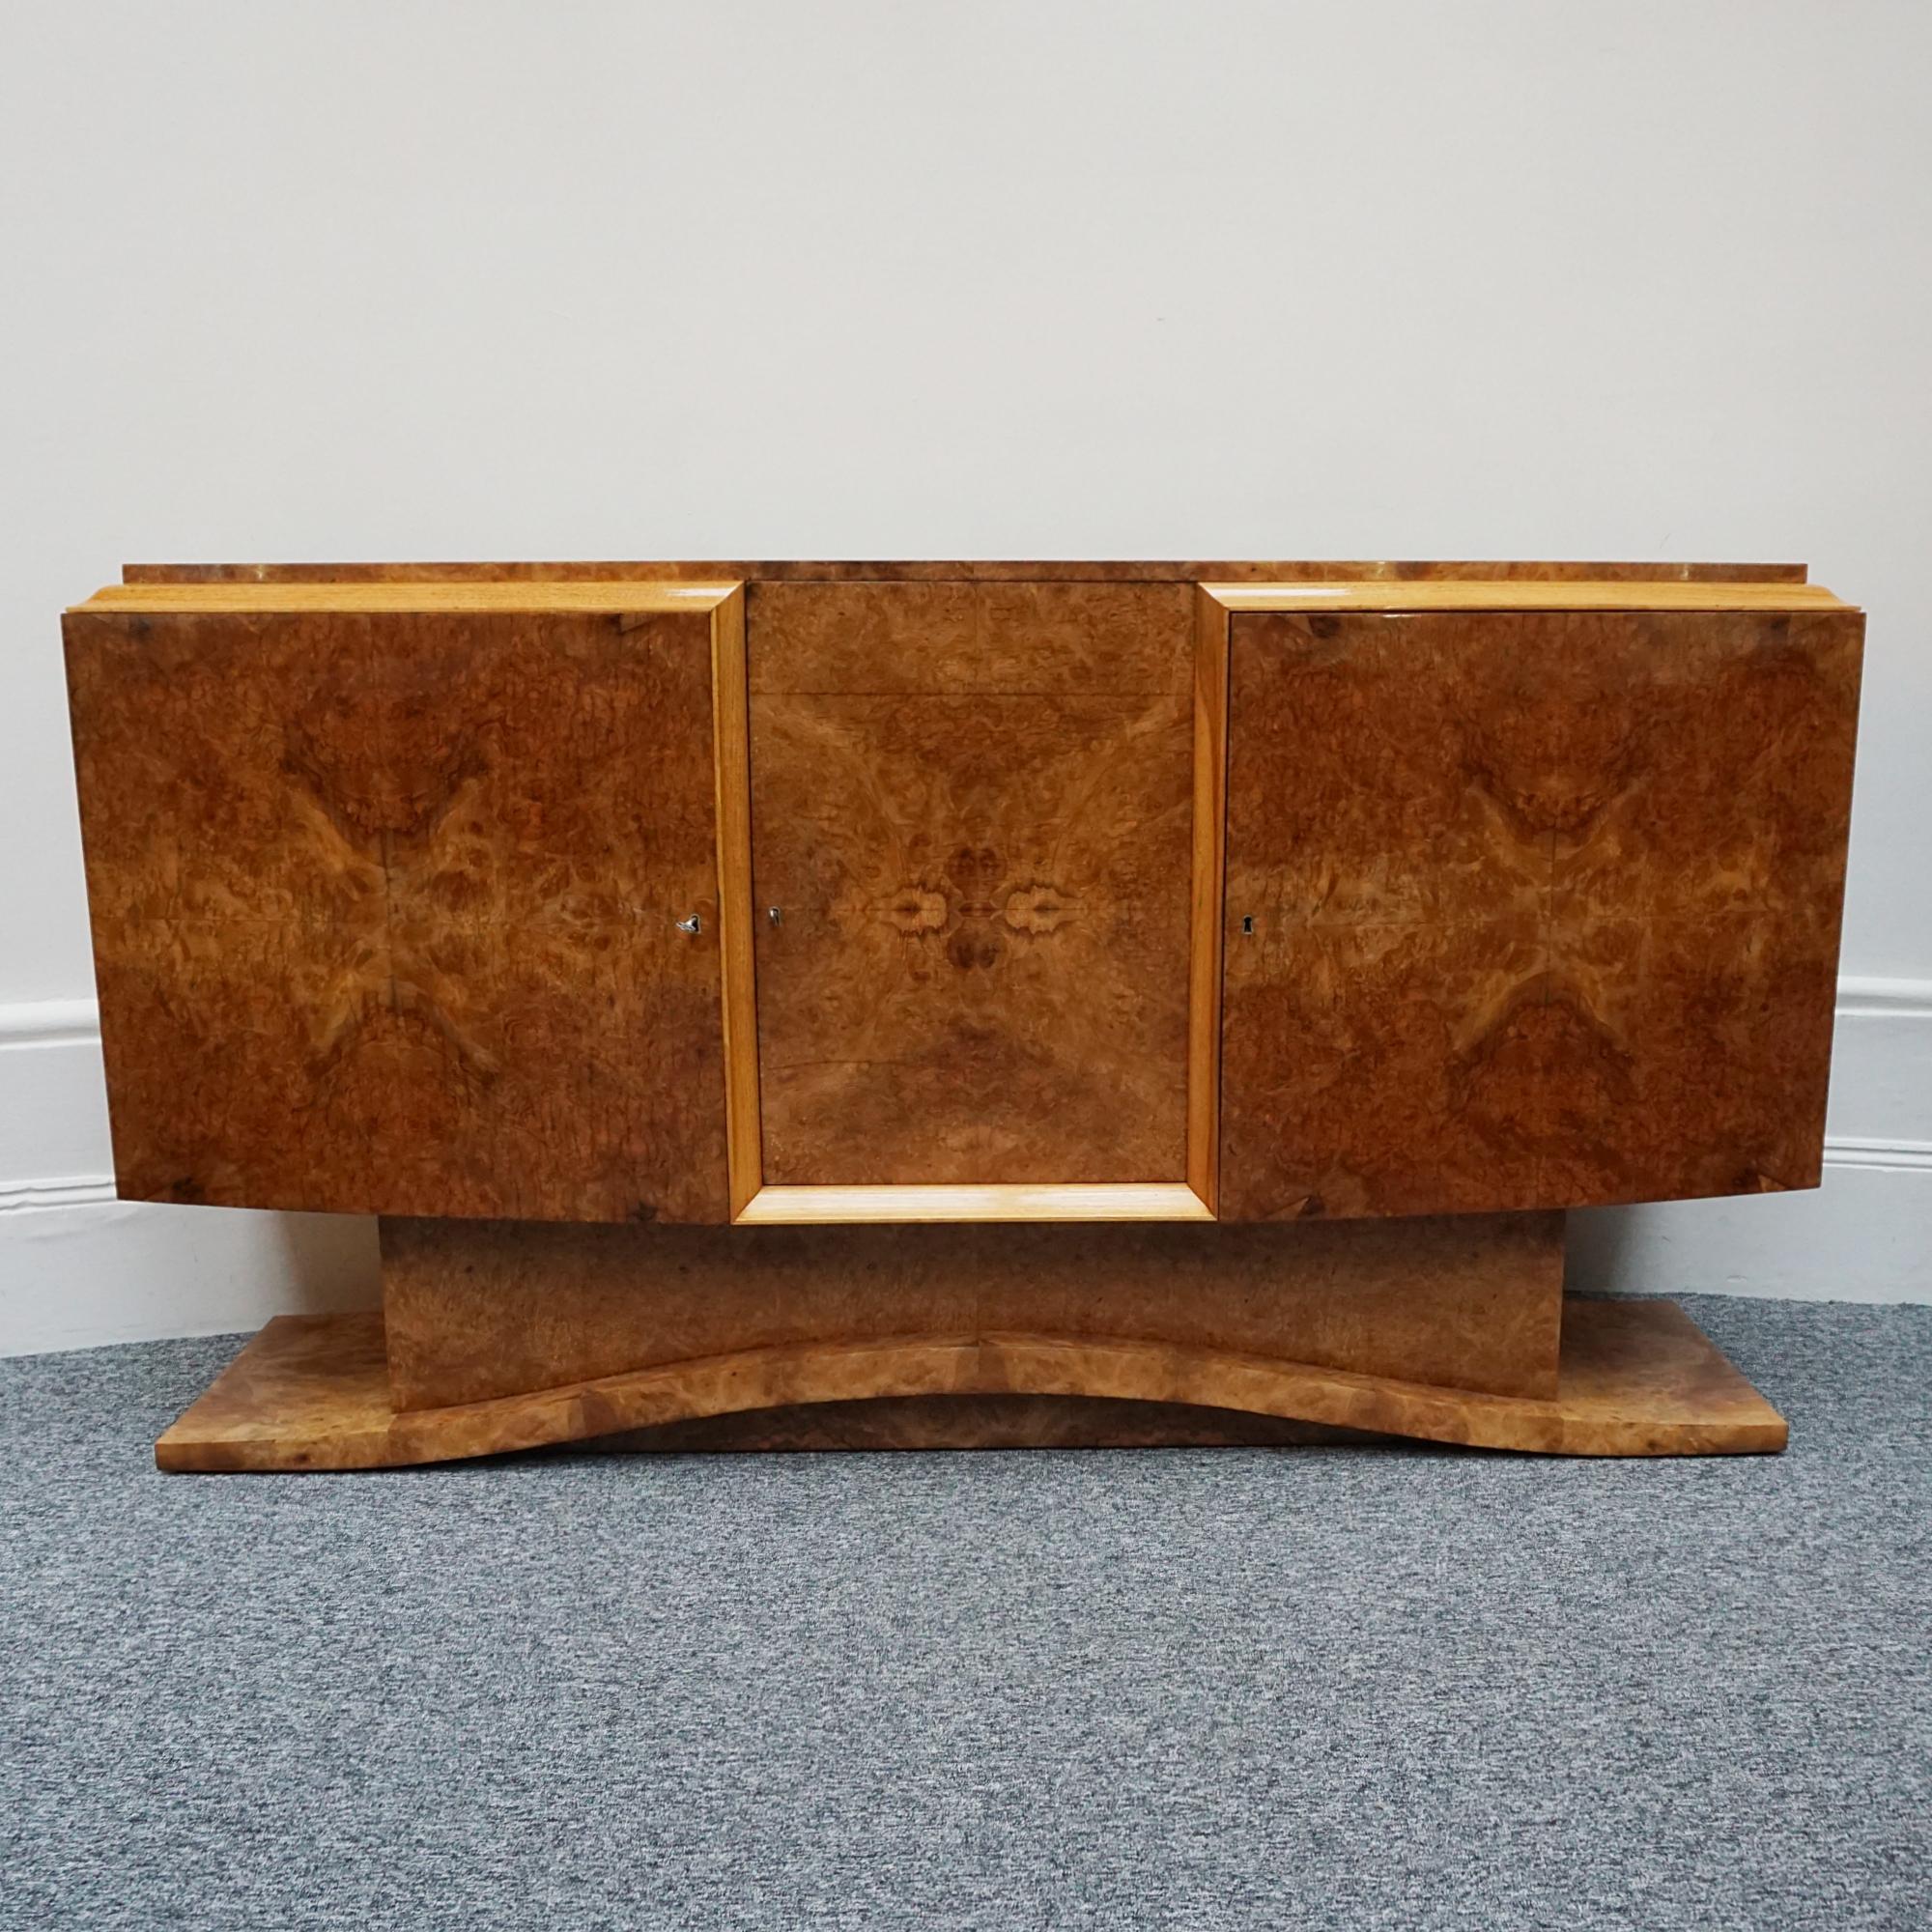 An Art Deco Sideboard by Hille. Burr walnut veneered with integral shelving and pull out drawers as well as a cocktail compartment. Set over a curved stepped base. 

Dimensions: H 97.5cm, W 183cm, D 51cm 

Origin: English

Date:  circa 1935

Item